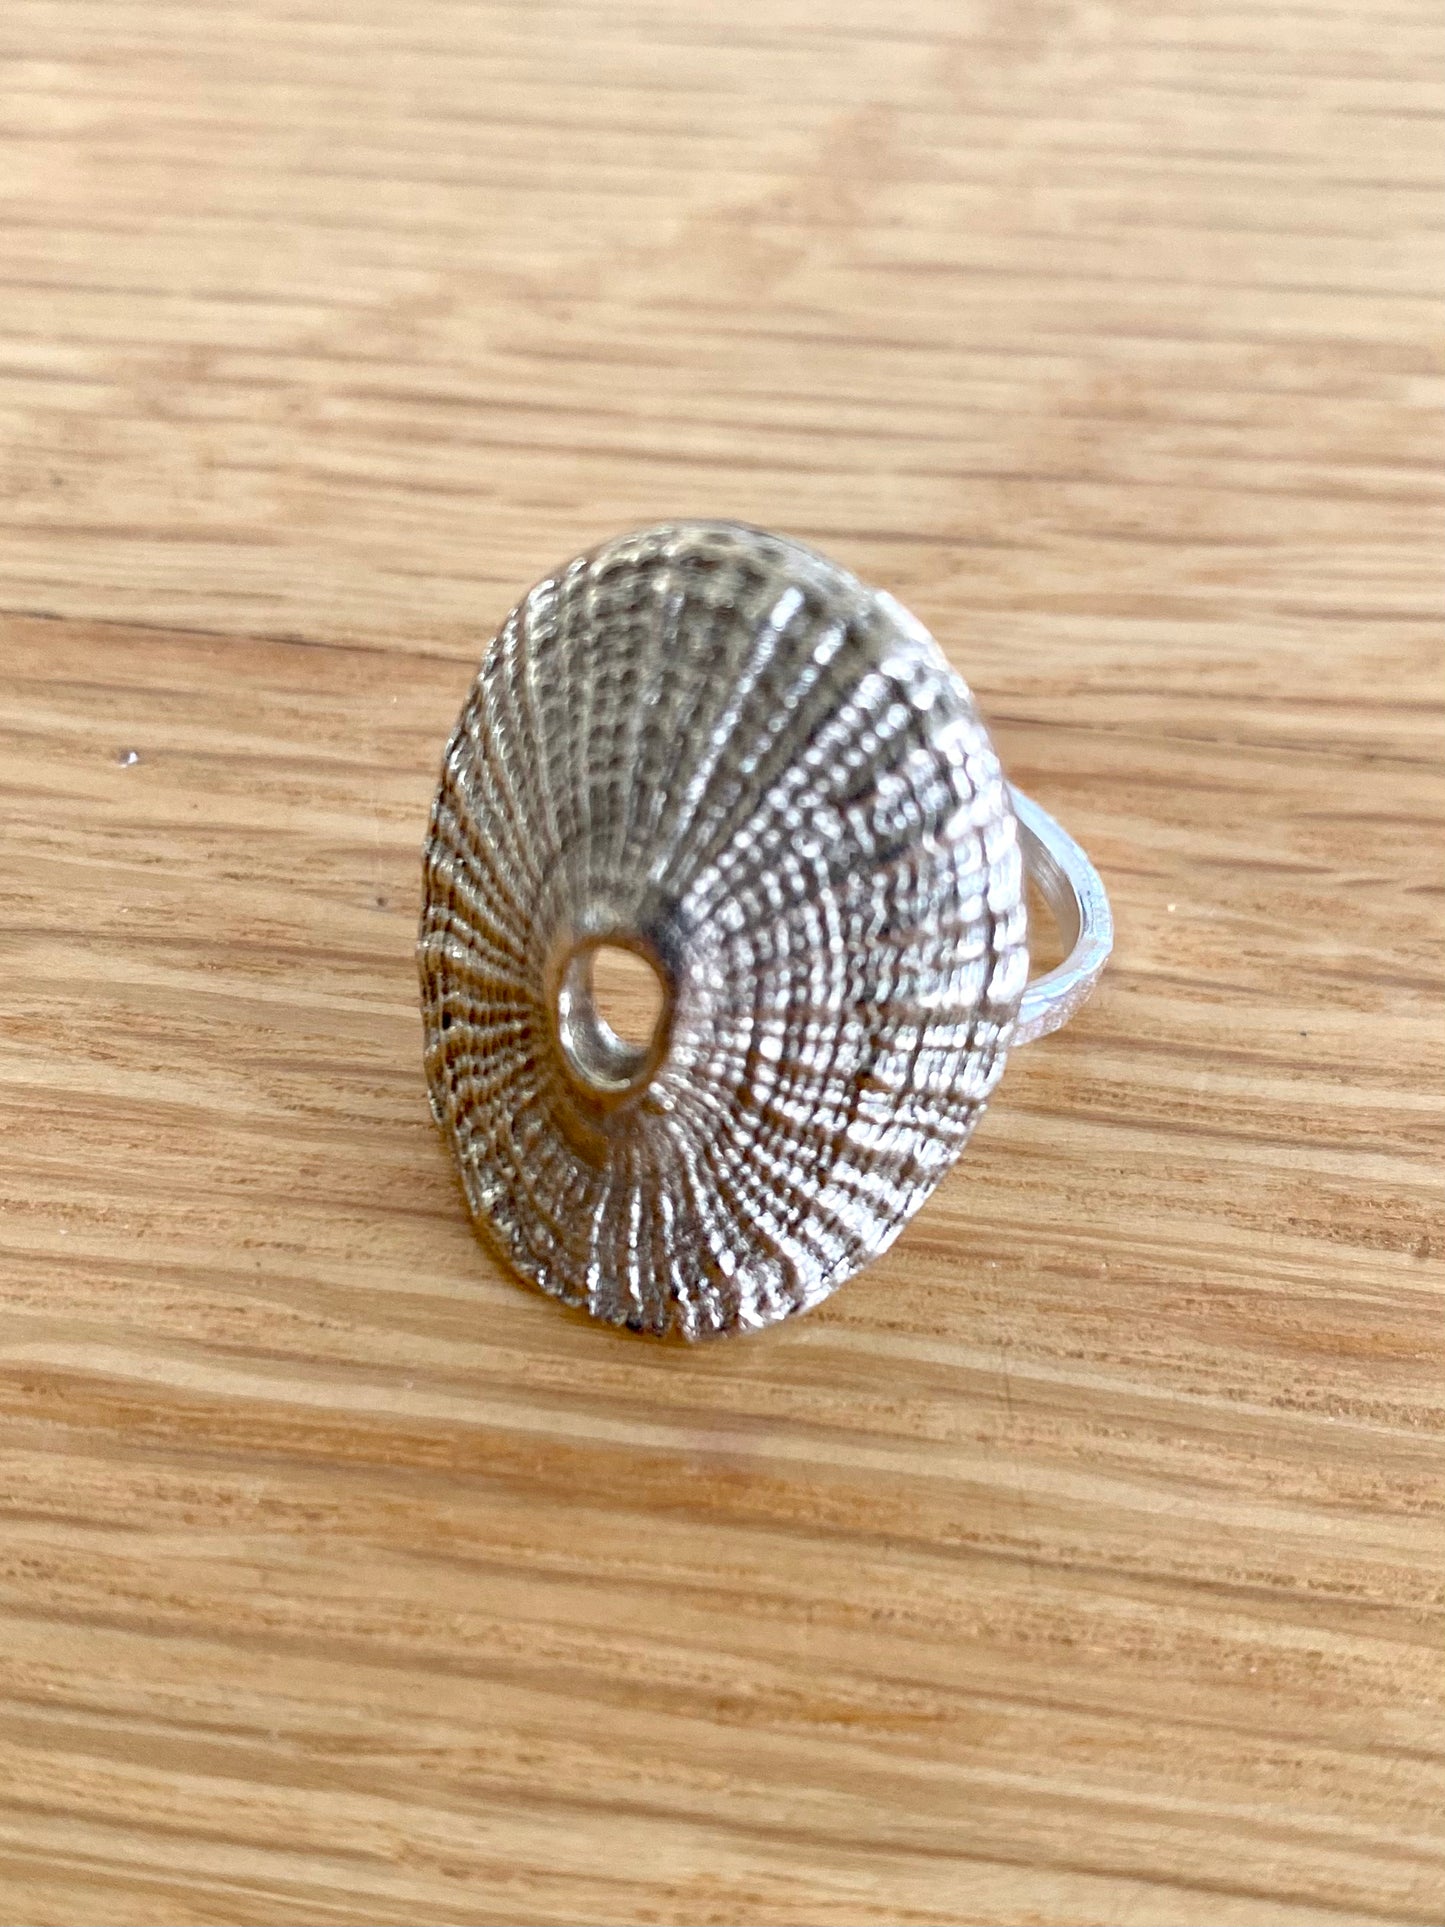 Silver textured seashell ring displayed on a wooden surface, capturing the intricate details and craftsmanship.